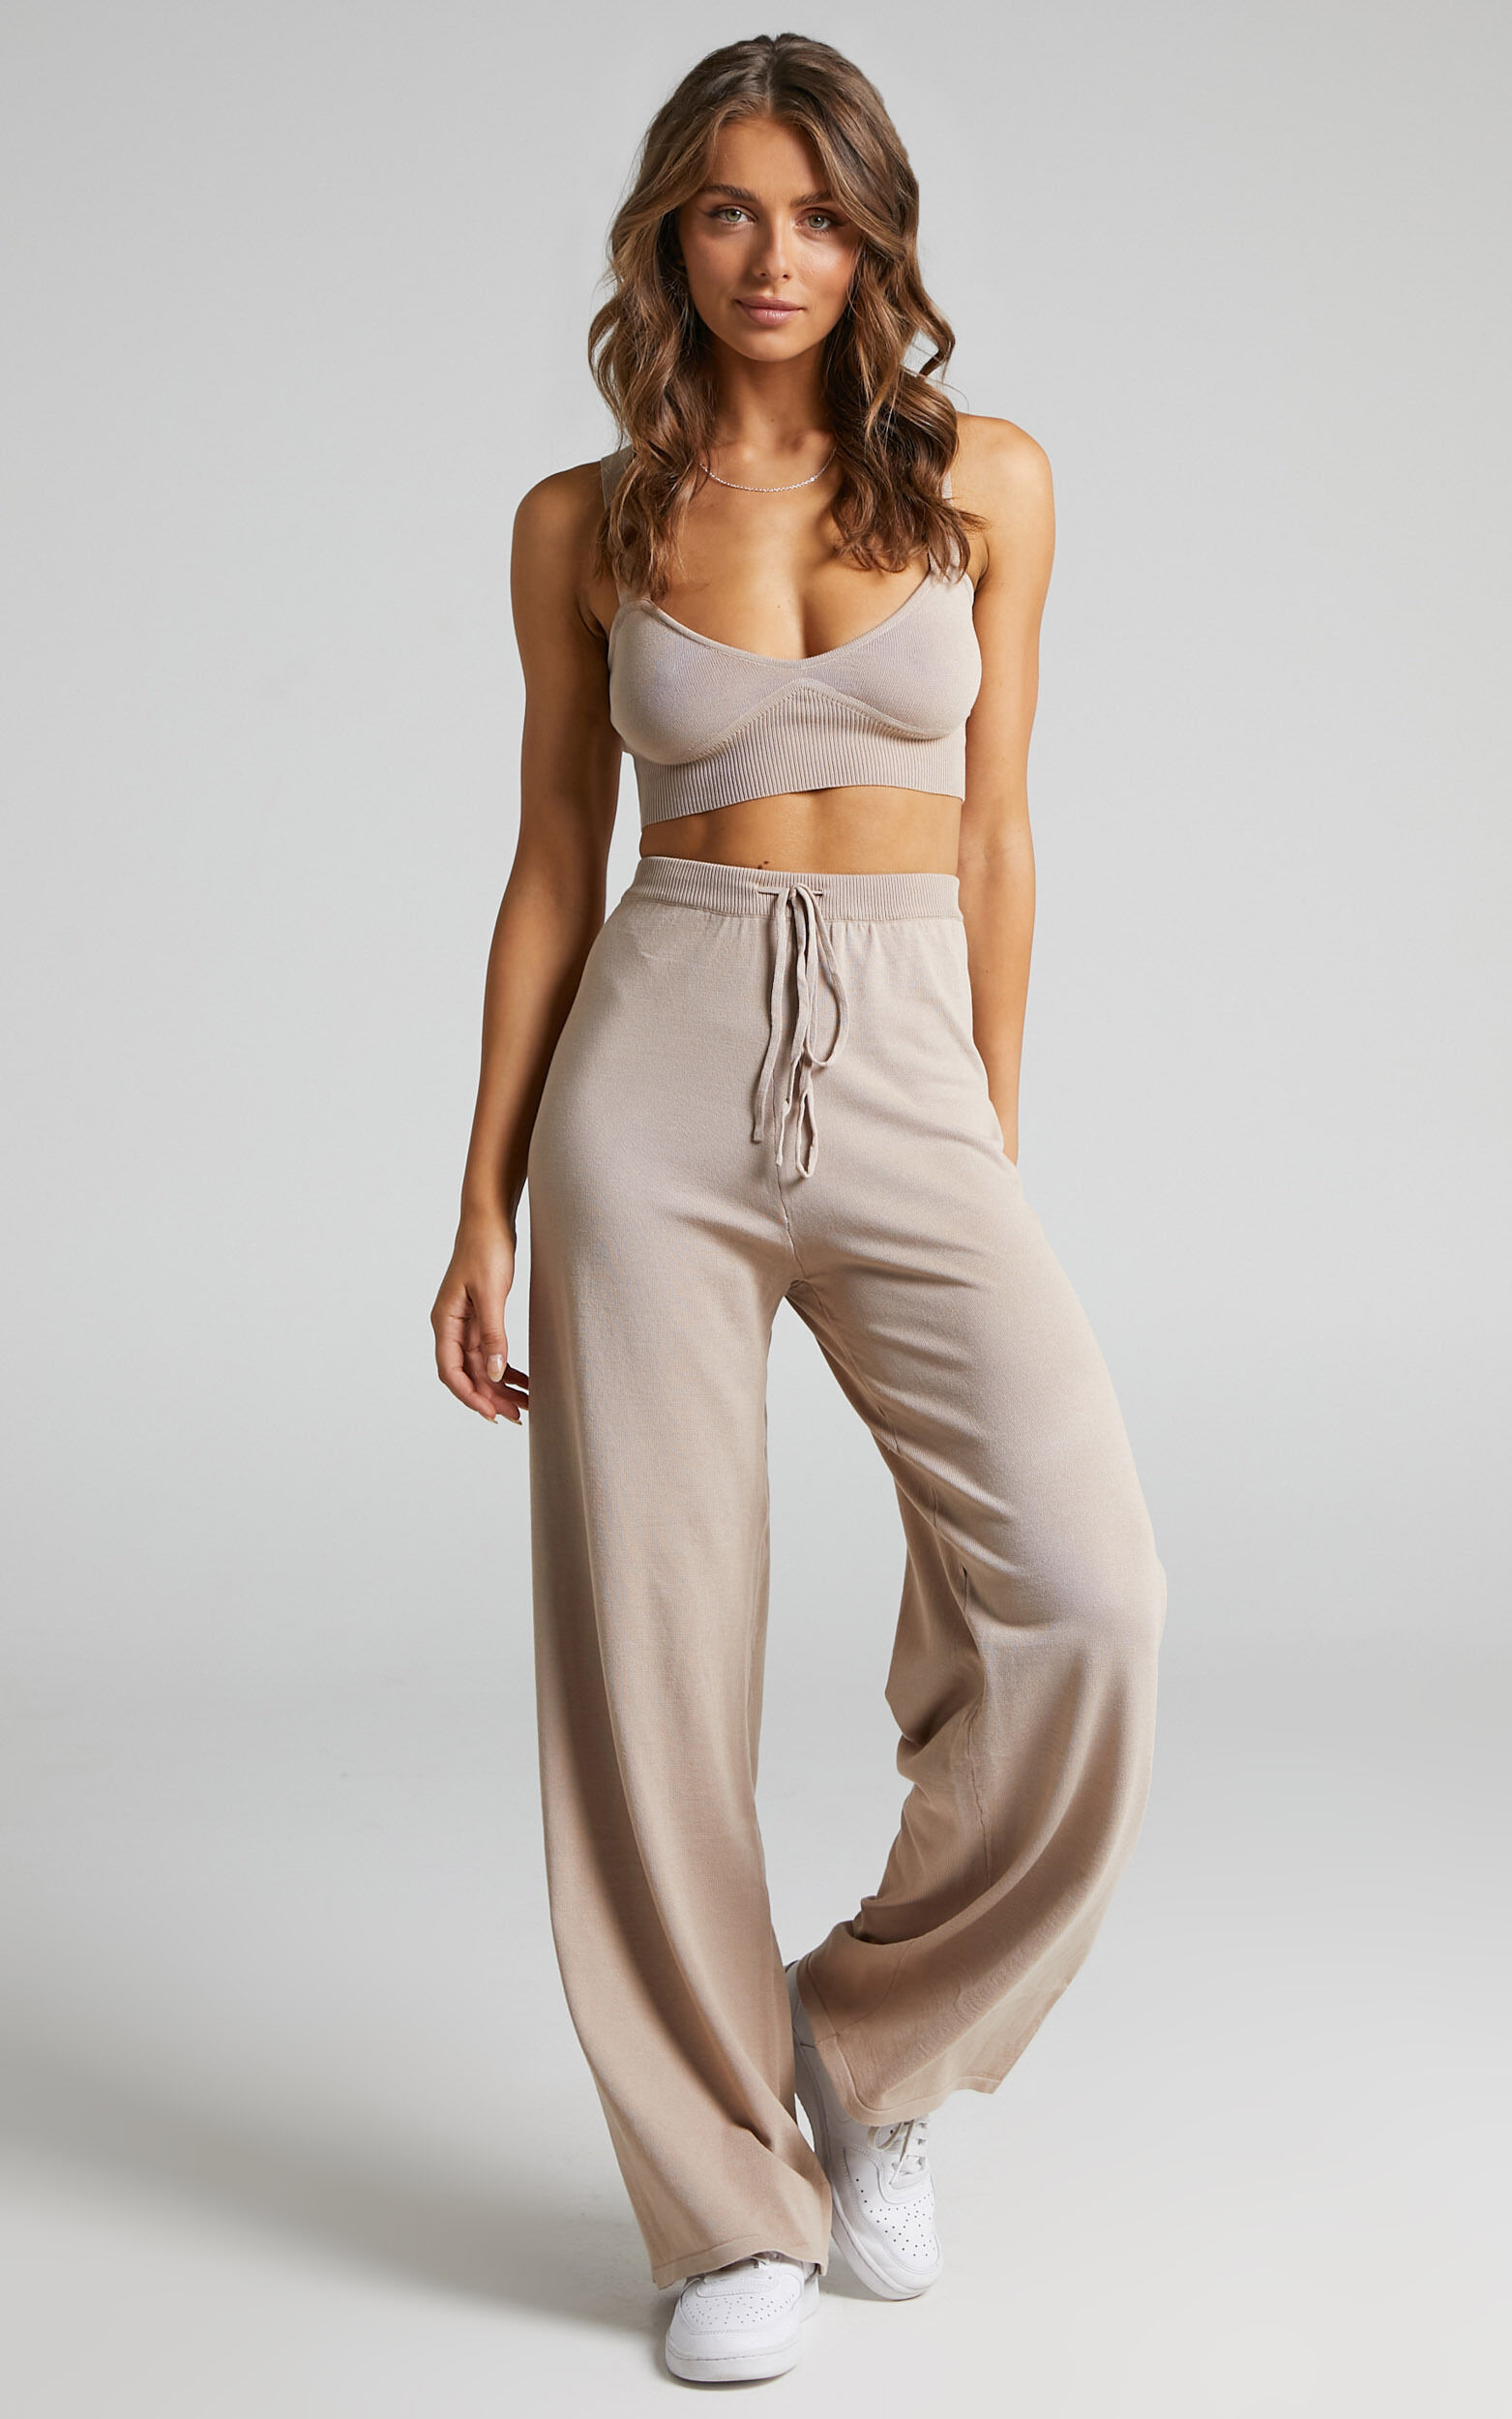 Chonnie Knit Bralette Top and Wide Leg Pants Two Piece Set in Mocha - 06, BRN1